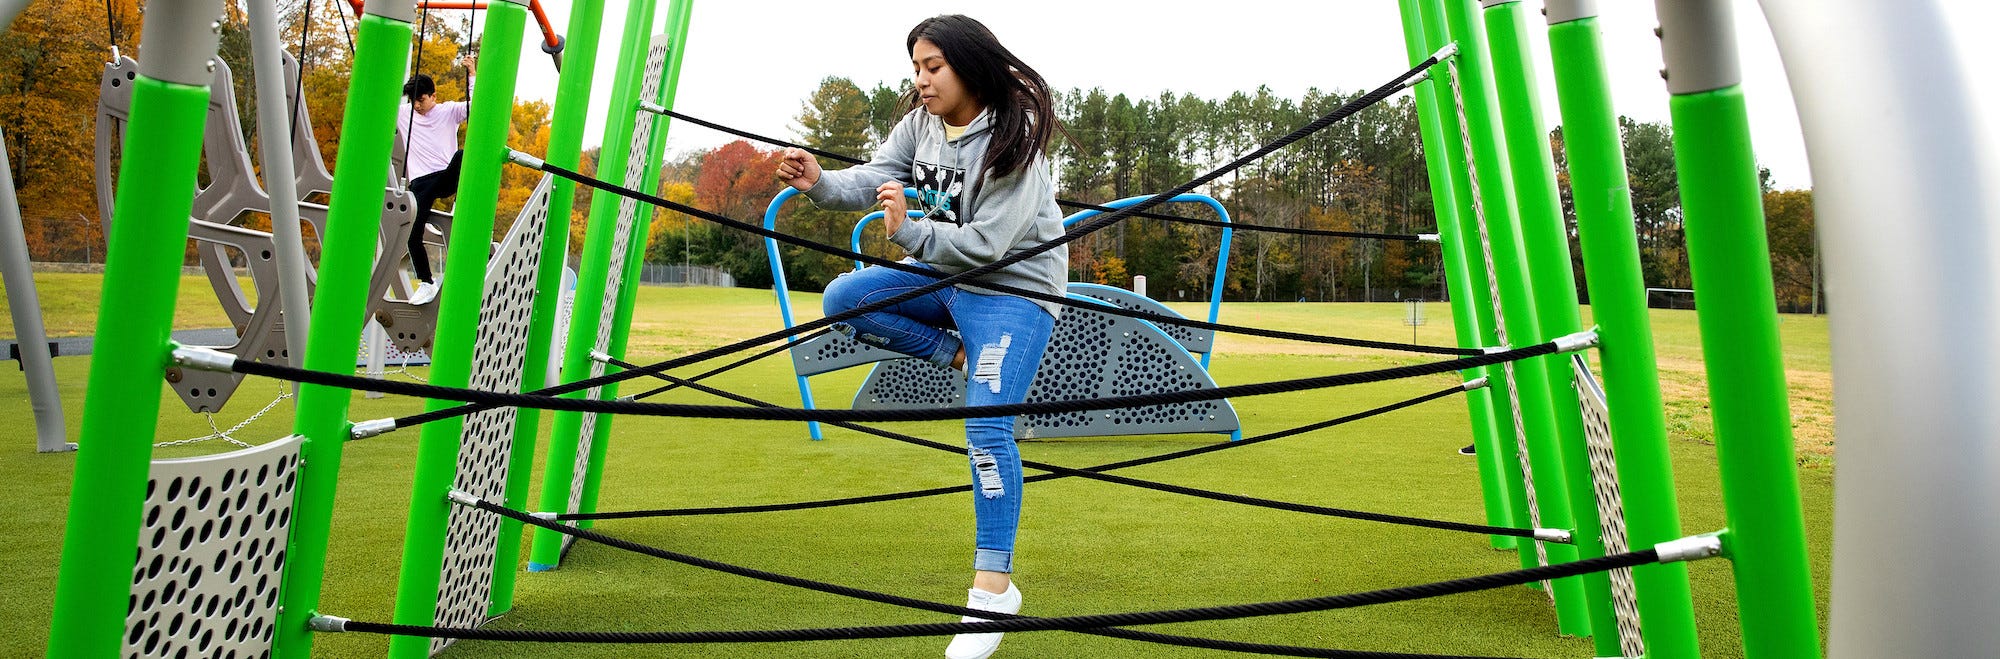 Transforming Playgrounds Into Ninja Warrior Obstacle Courses